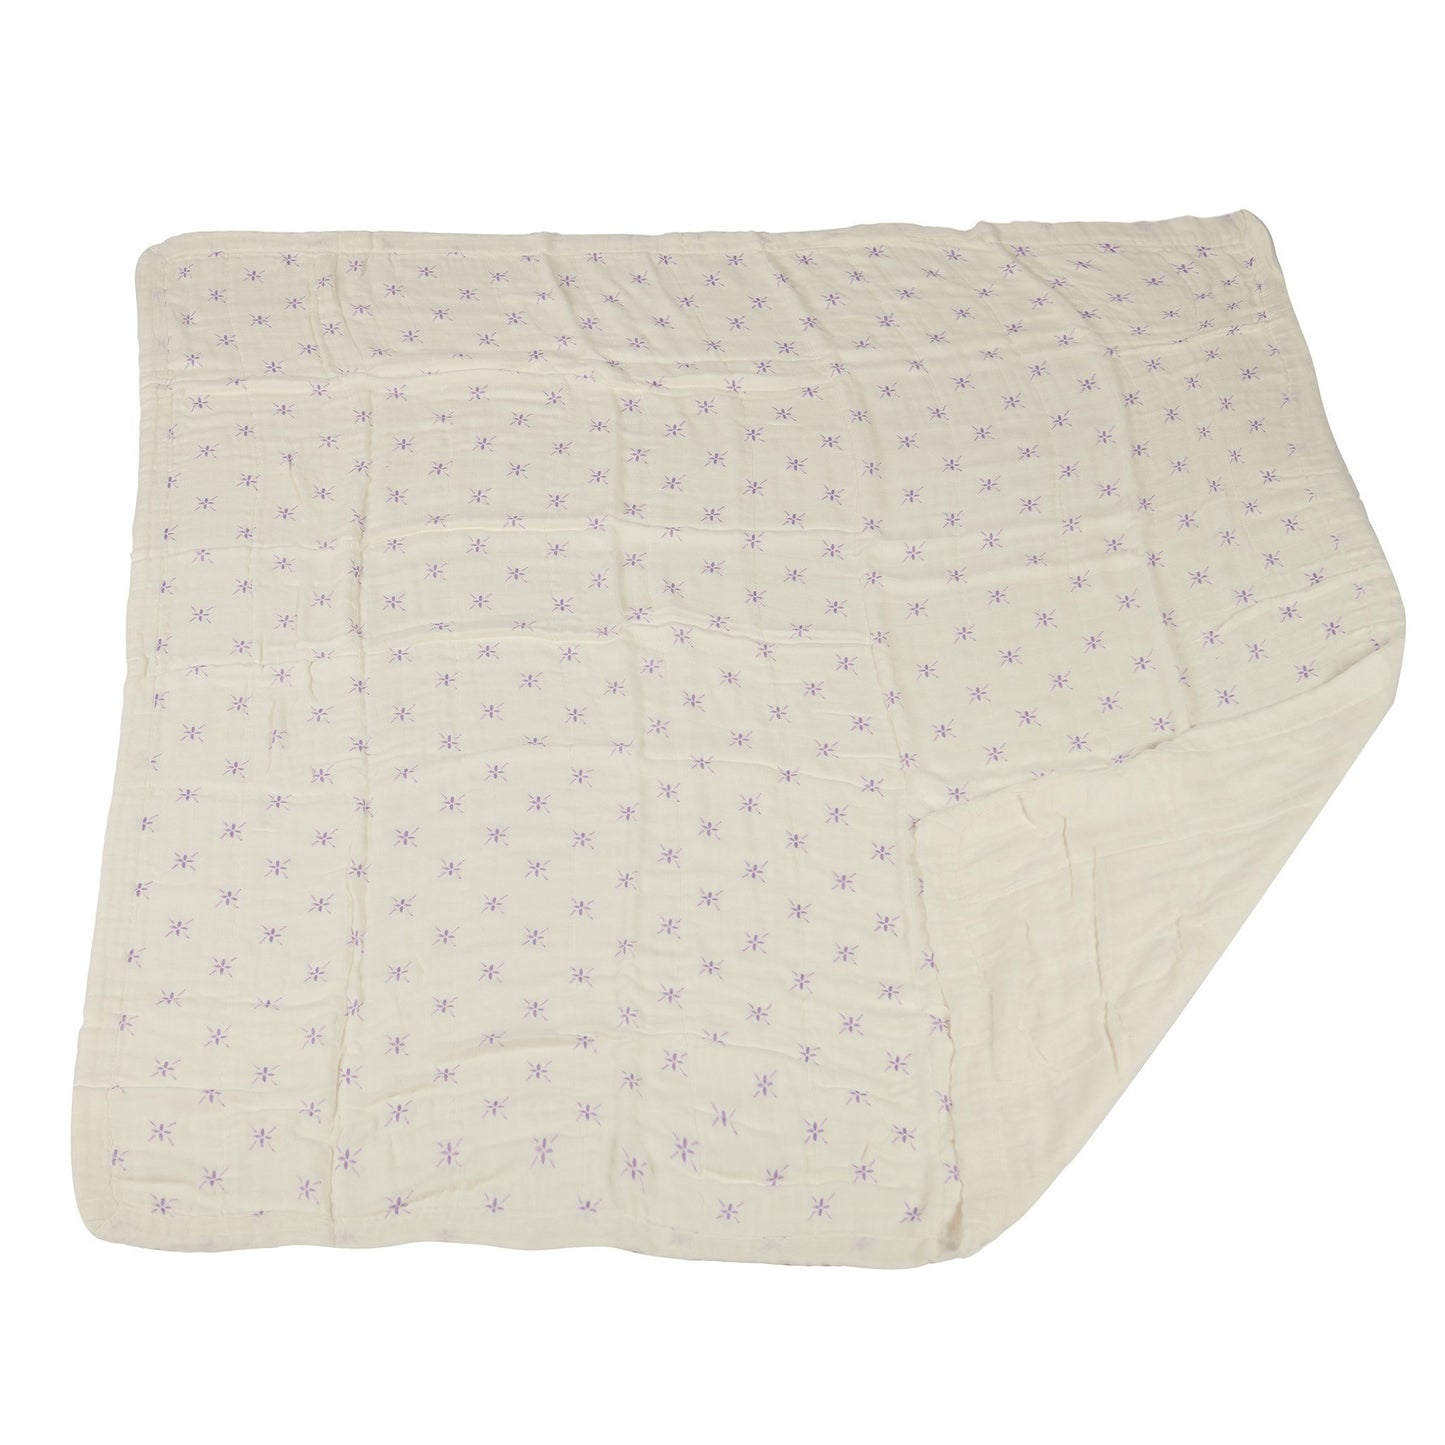 Watercolor Star and White Newcastle Blanket